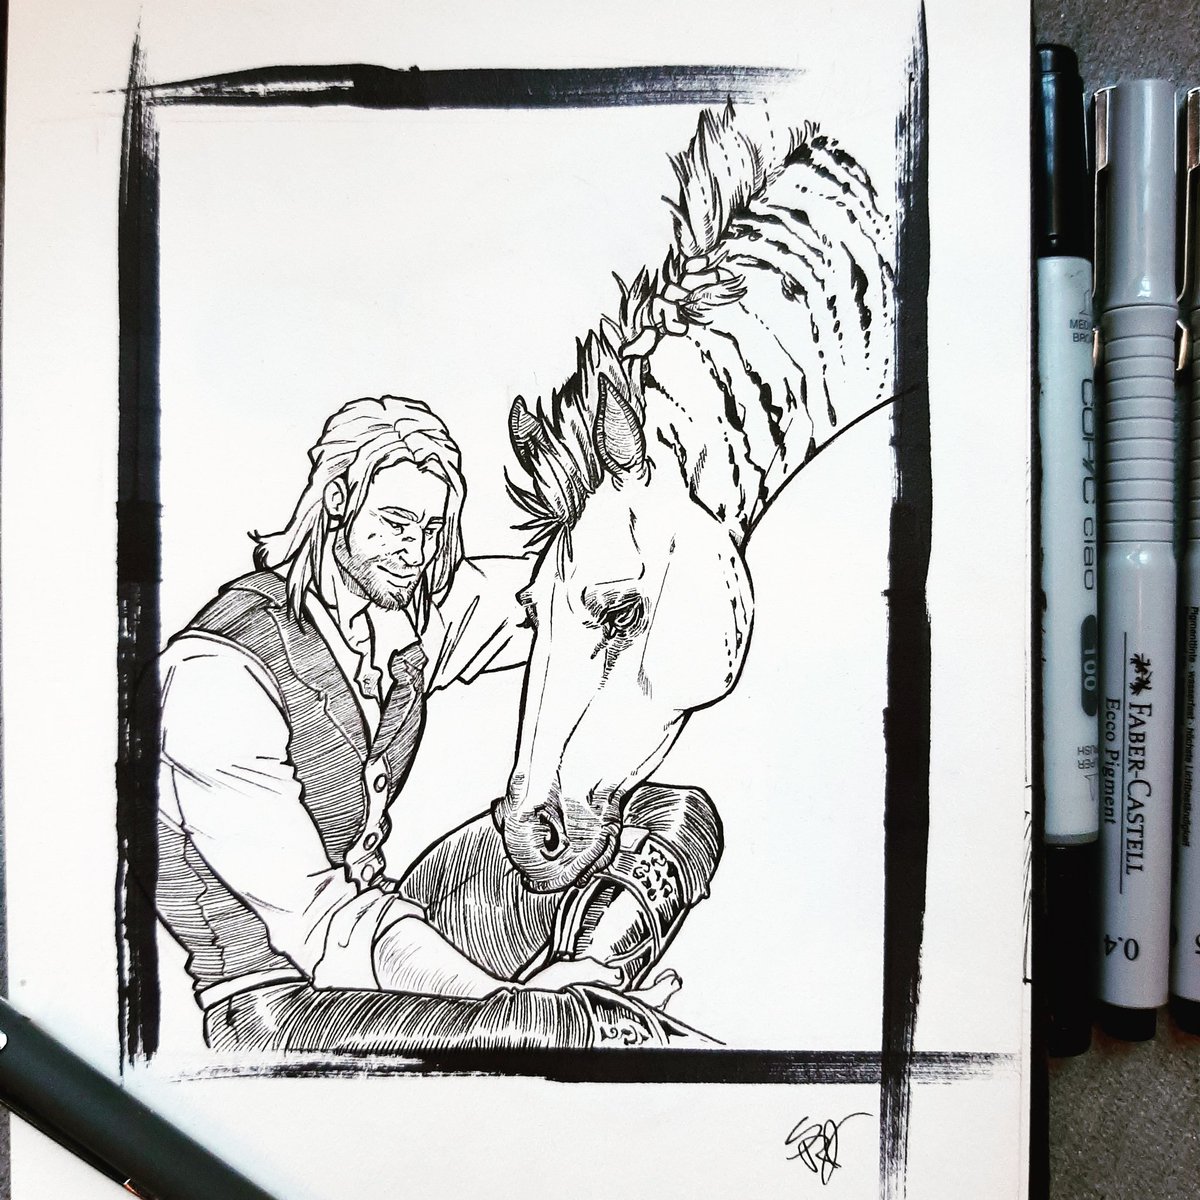 Red Inktober Redemption day 8: Mane

Did you get it? Arthur with long mane and his horse with short mane. Oh, well I was looking for an excuse to draw Percival. 
#reddeadredemption2 #rdr2 #redinktoberredemption #rdr2inktober #inktober2019 #inktober #arthurmorgan #traditionalart 